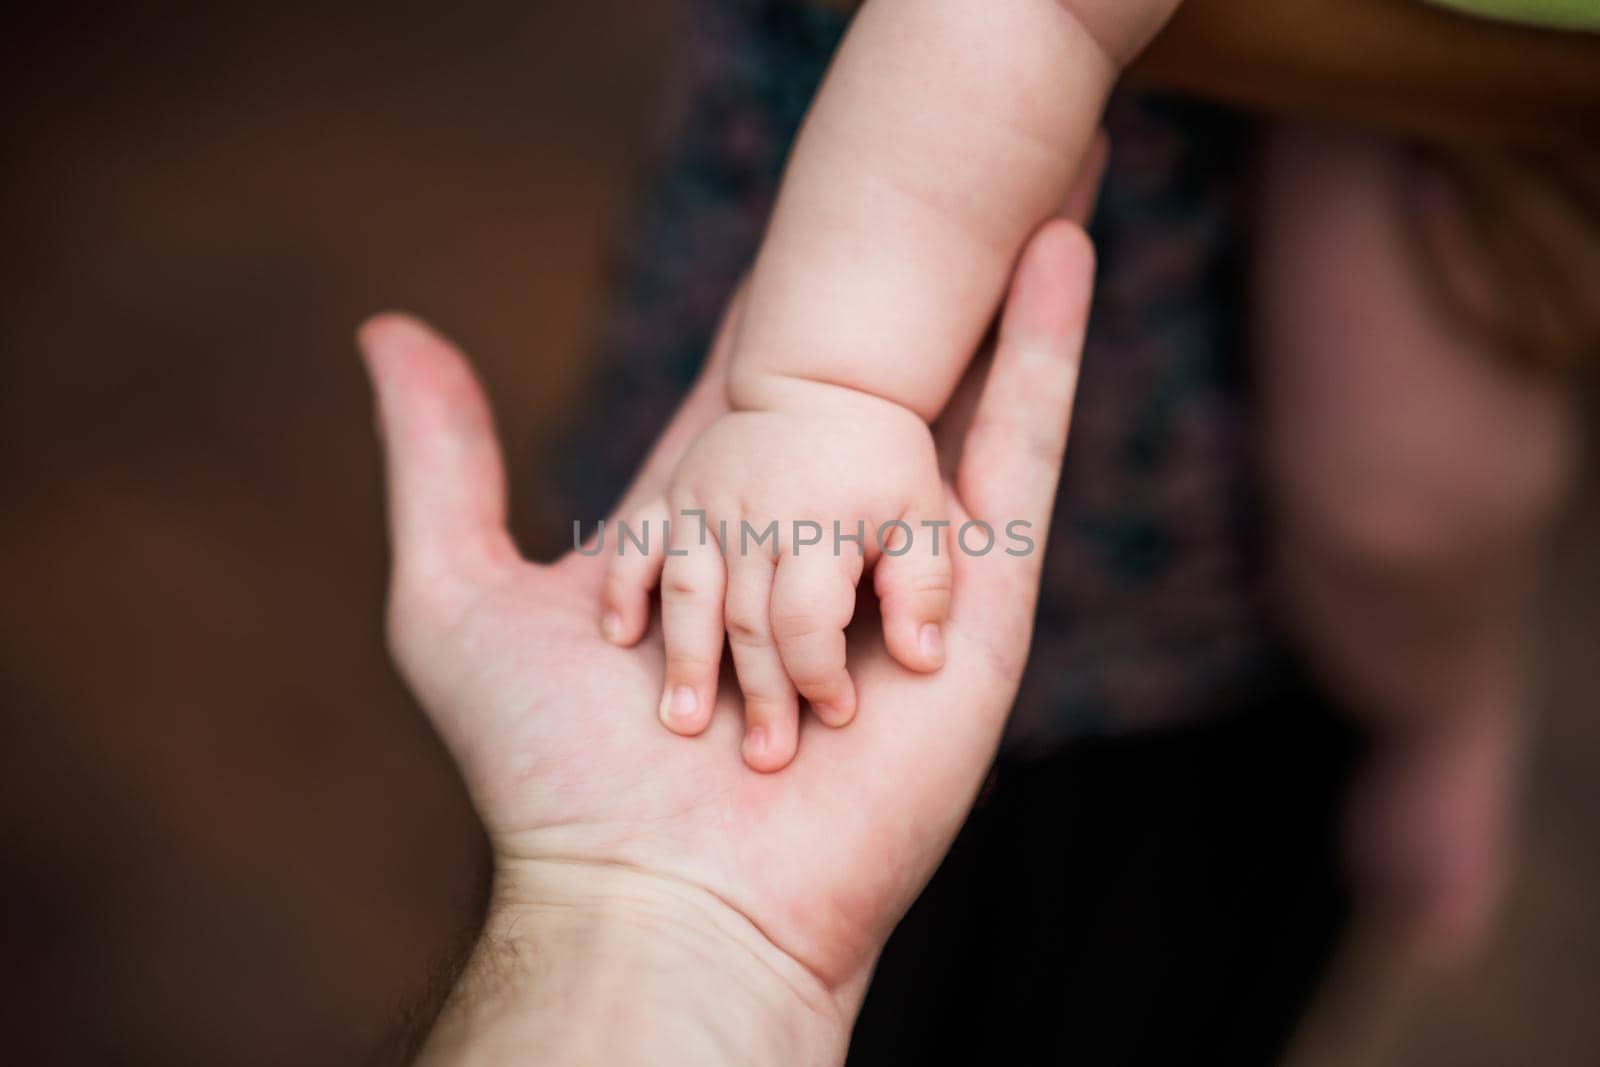 Close up image of  father's   and his baby boy son hands holding each other. Focus on fingers.